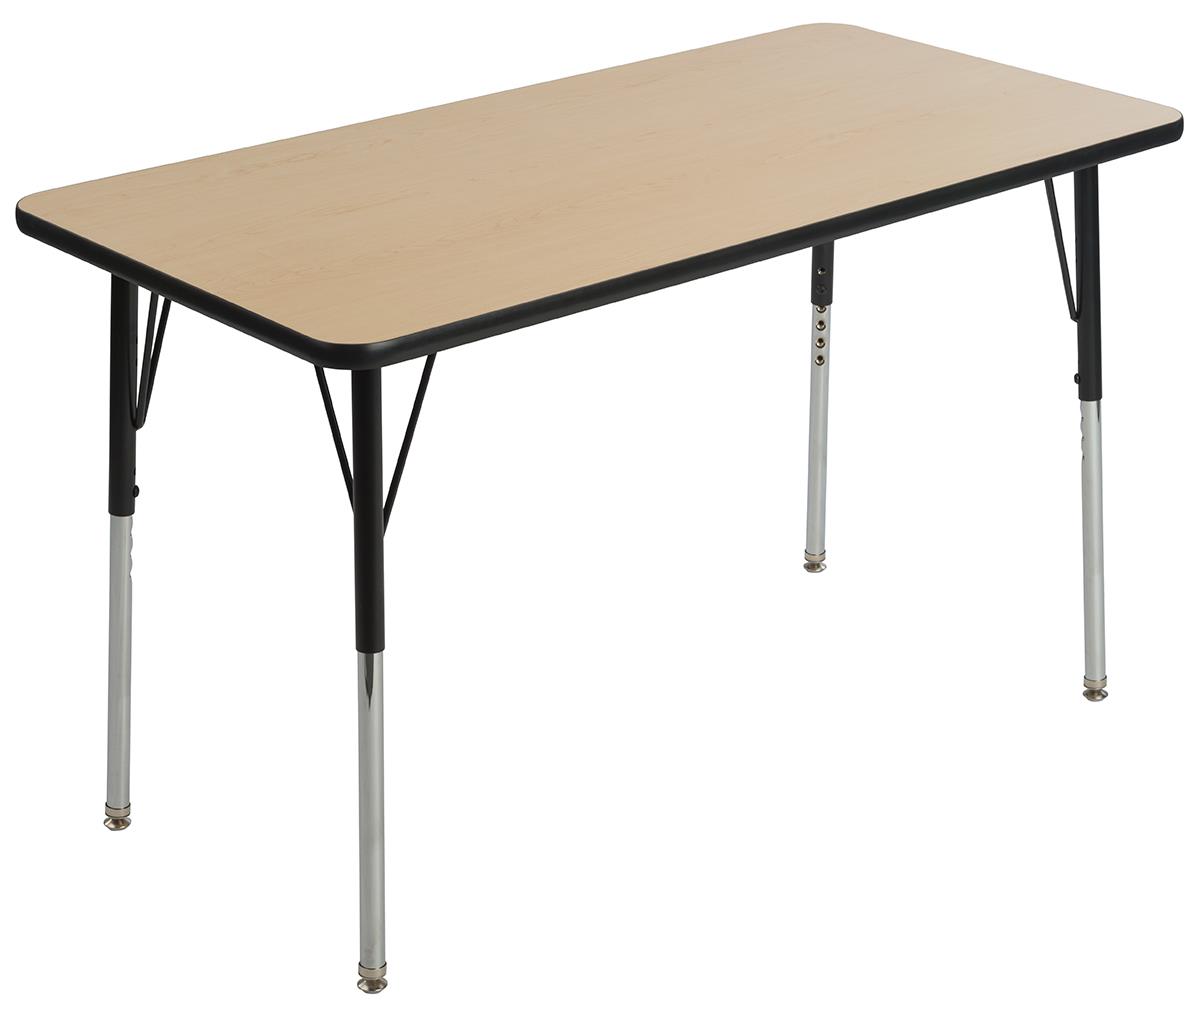 light table for classroom